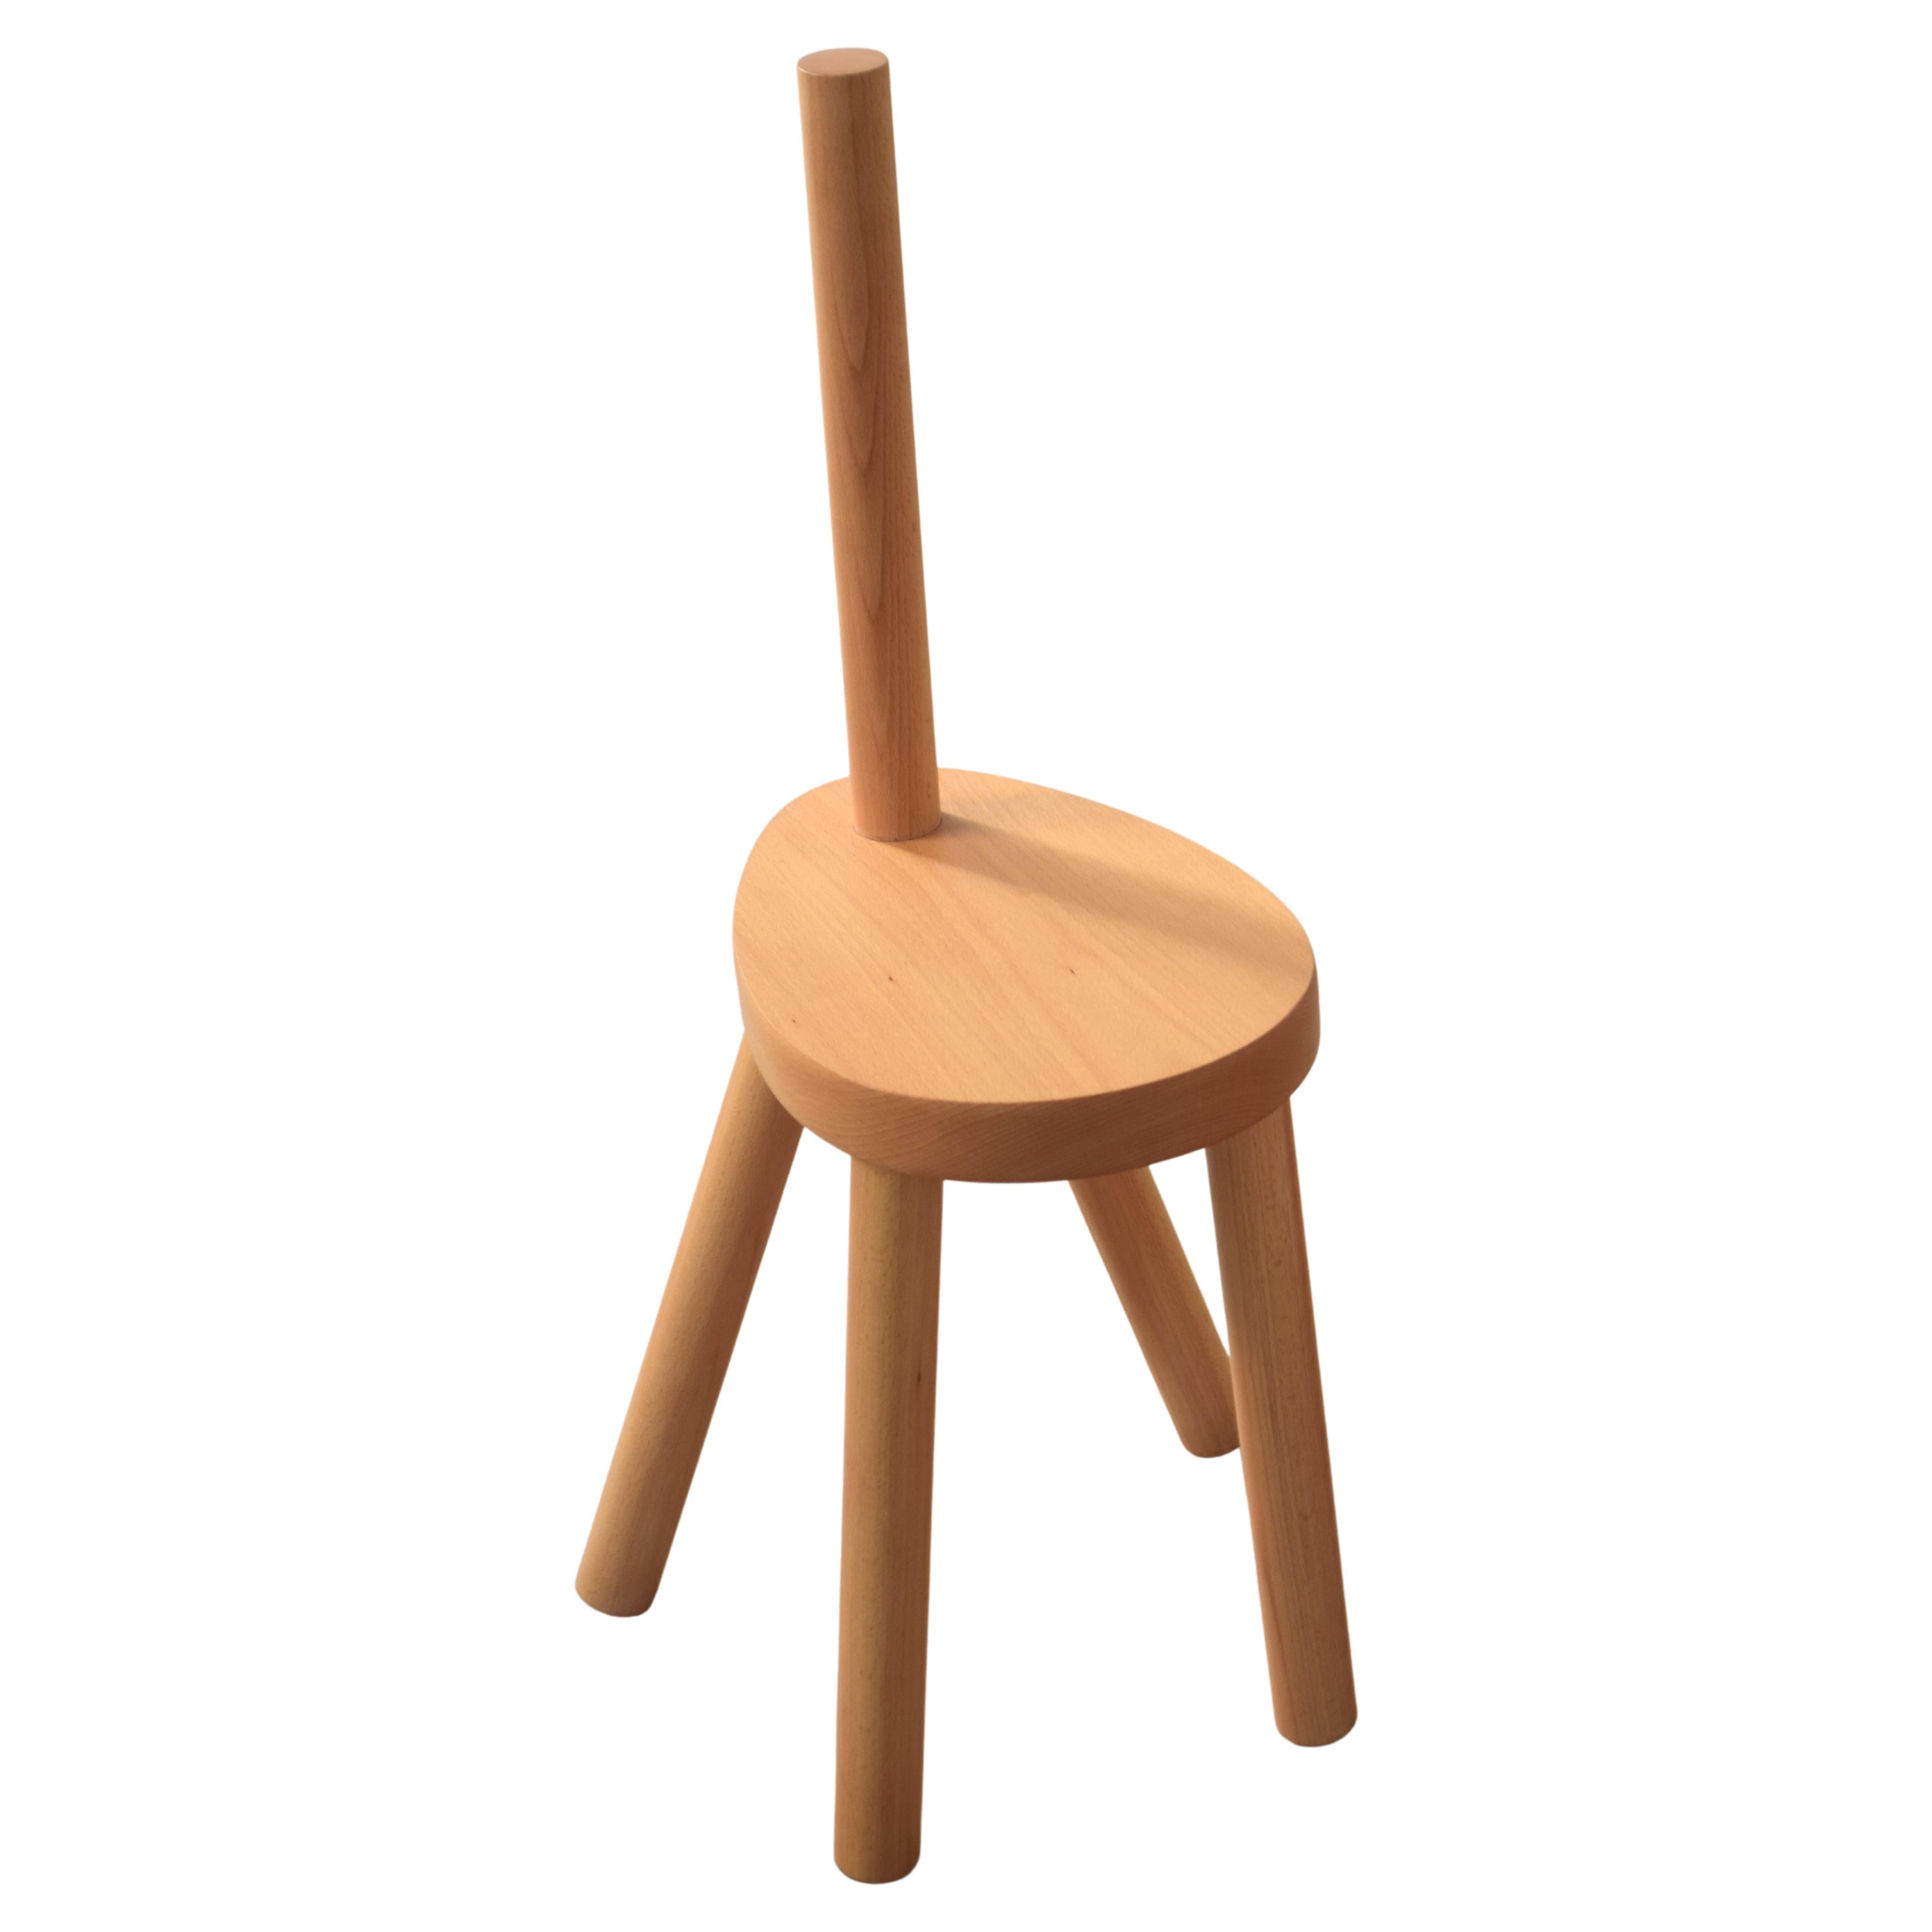 "Y" Chair 48cm Solid Beech Wood and Metal Joints